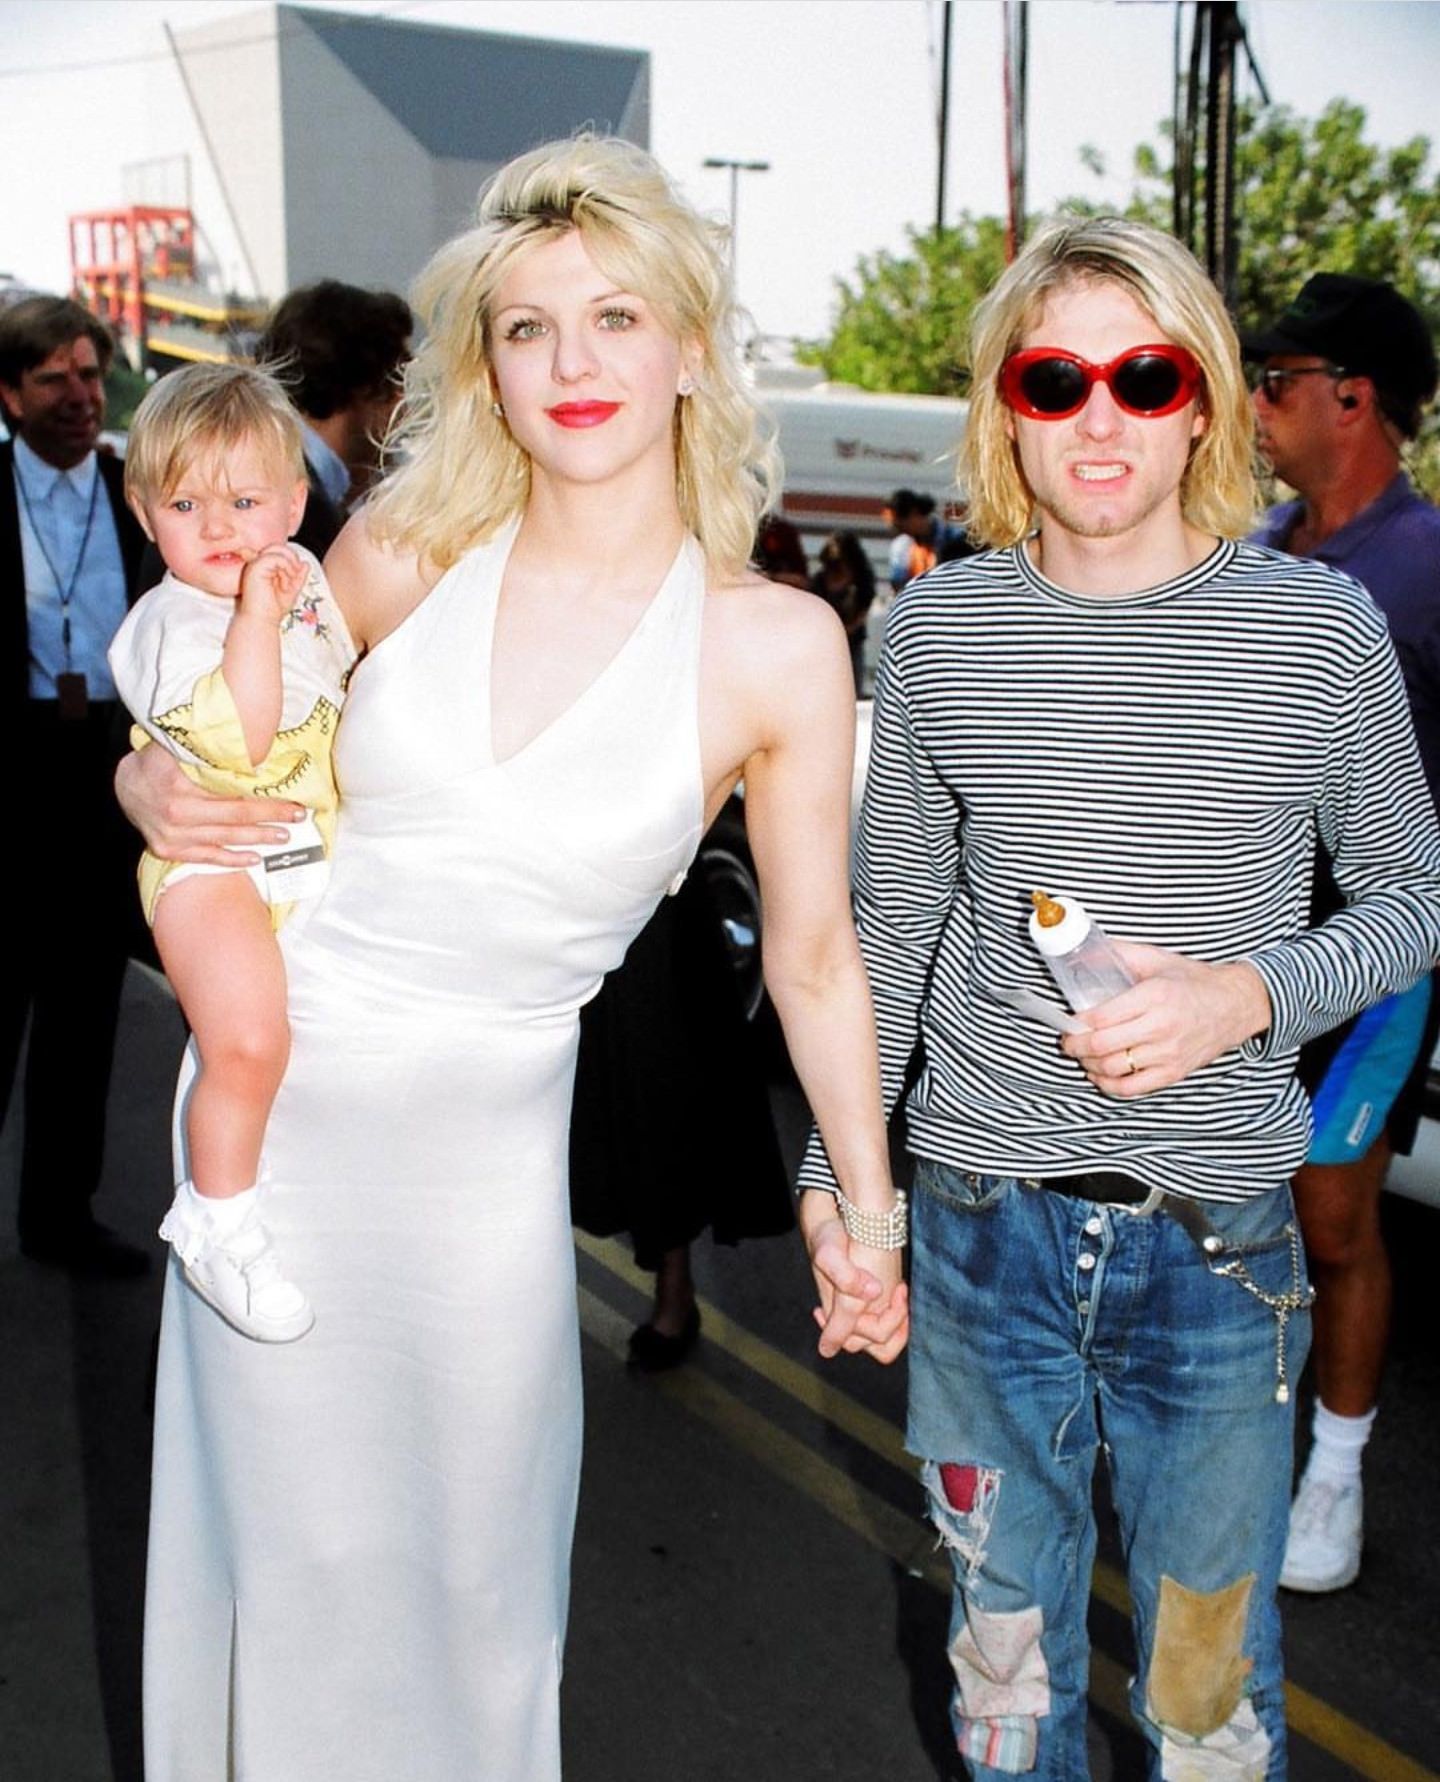 Kurt Cobain looks like a child attending an event with his mother and baby sister.